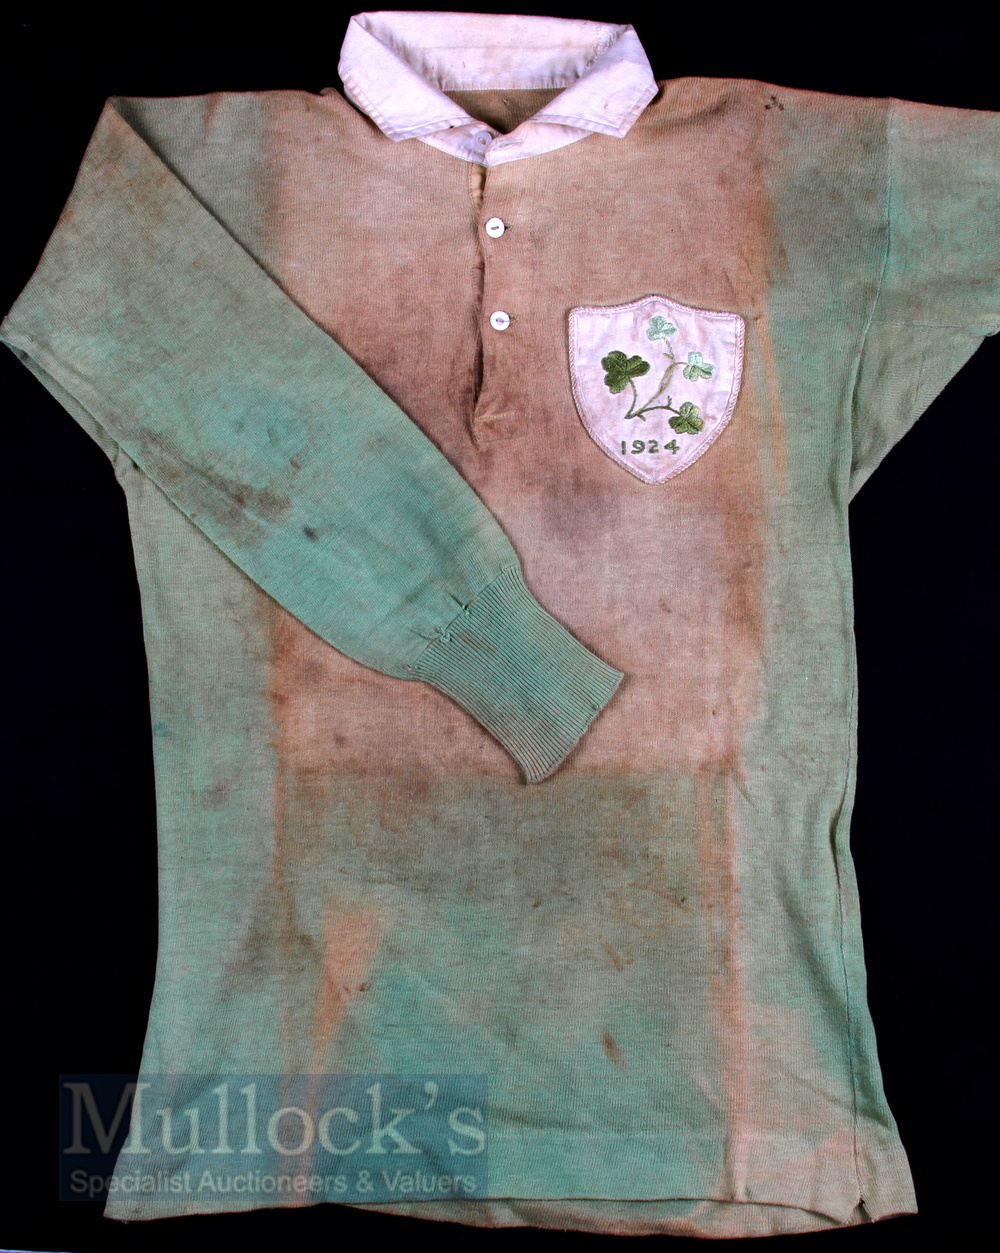 1924 Scarce Ireland Green International Rugby Jersey exchanged with Dr A C Gillies: have - Image 3 of 6